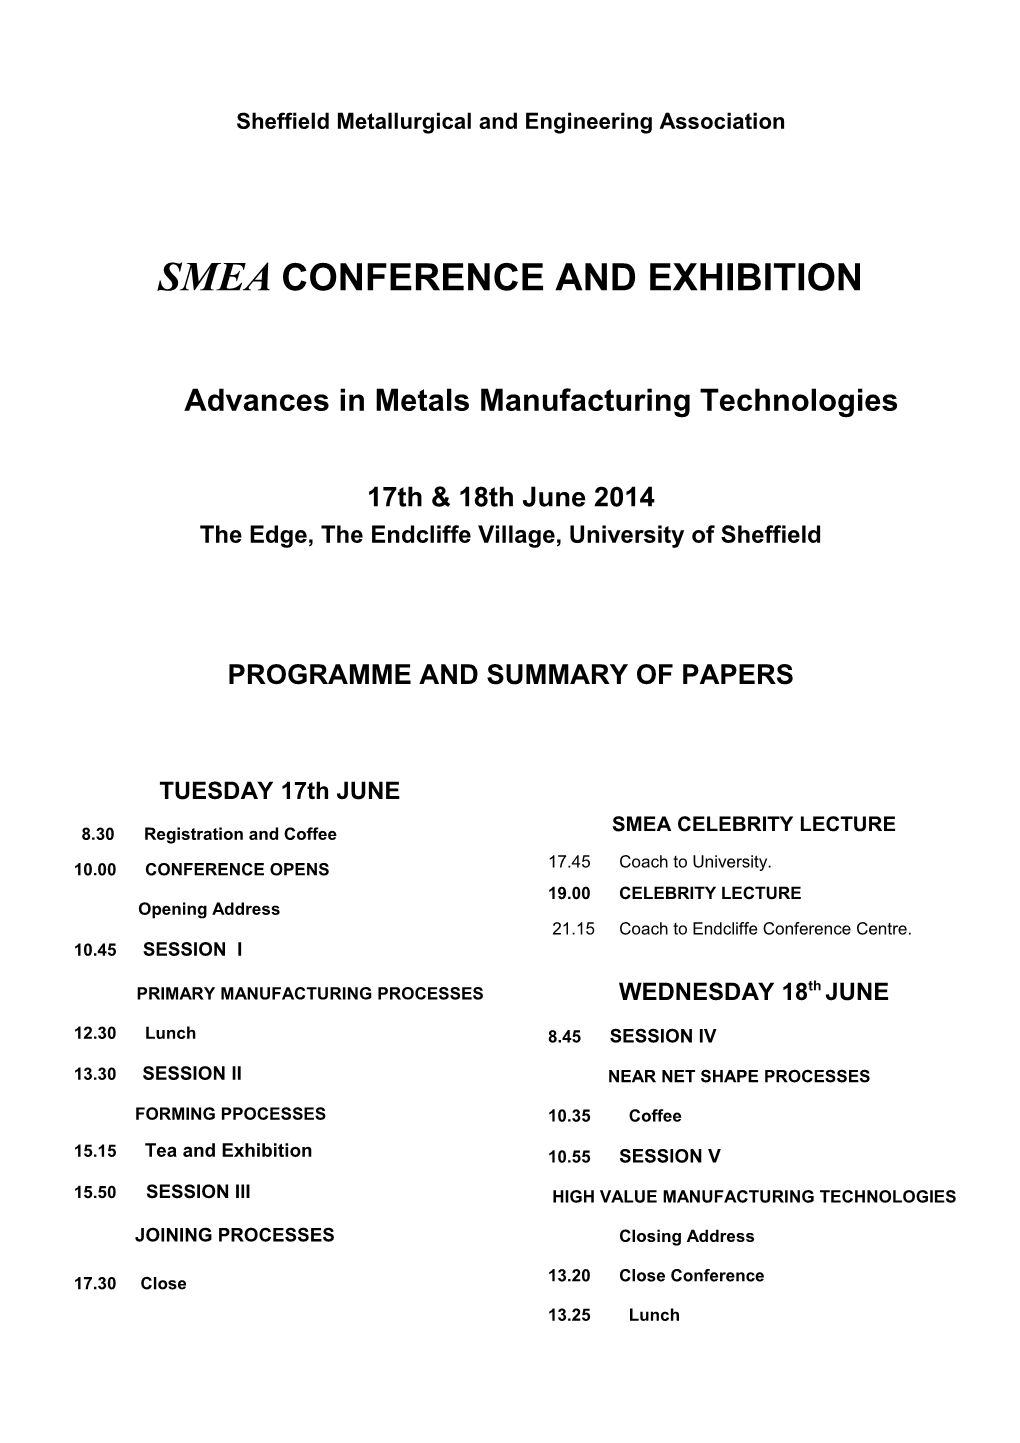 SMEA Annual Conference and Exhibition